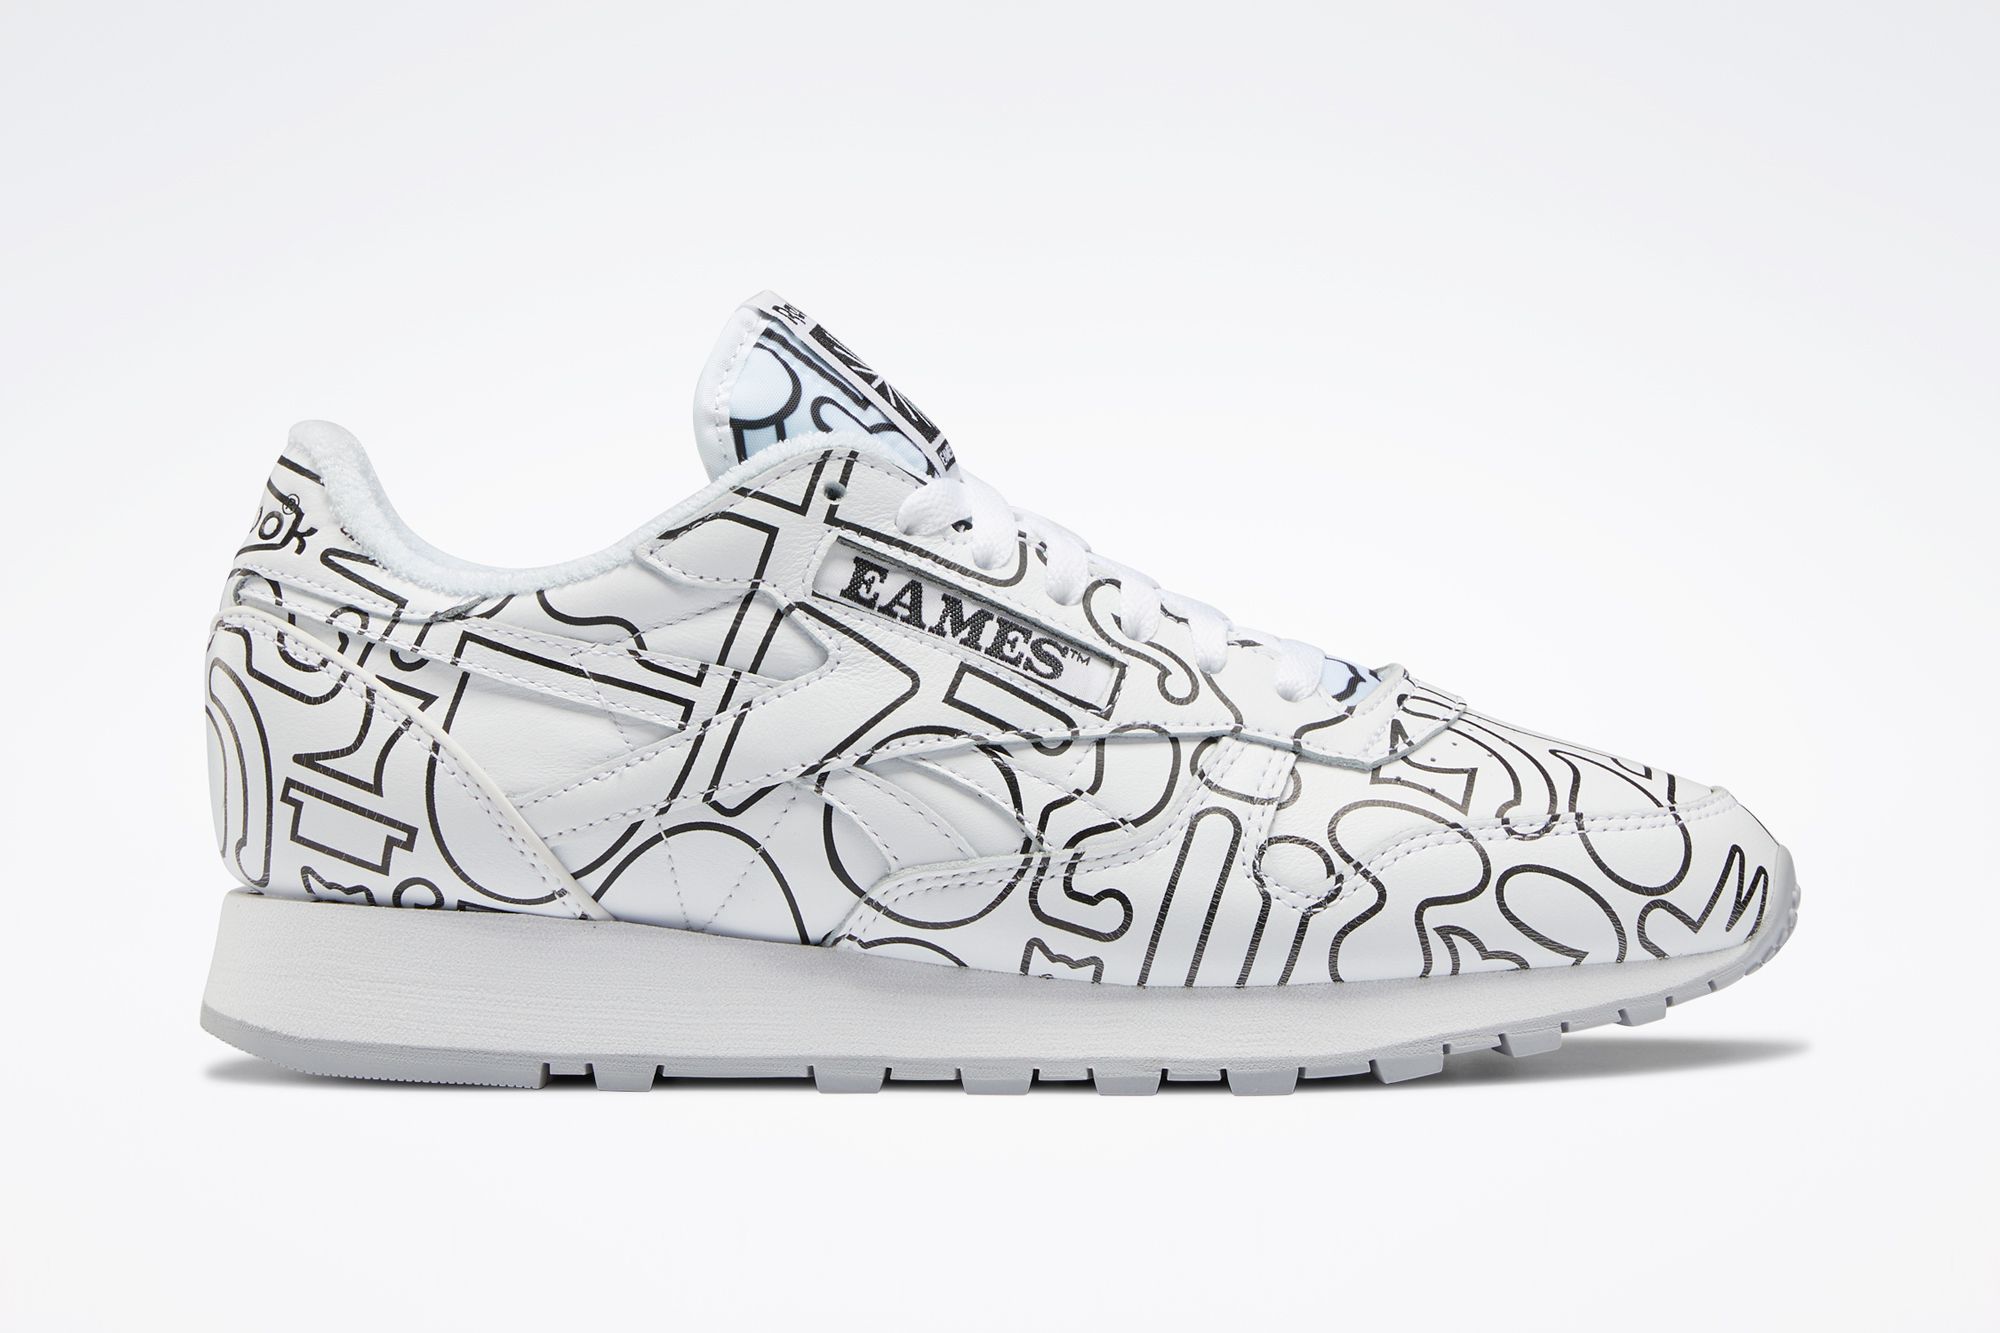 Eames x Reebok Classic Leather 'Colouring Toy'